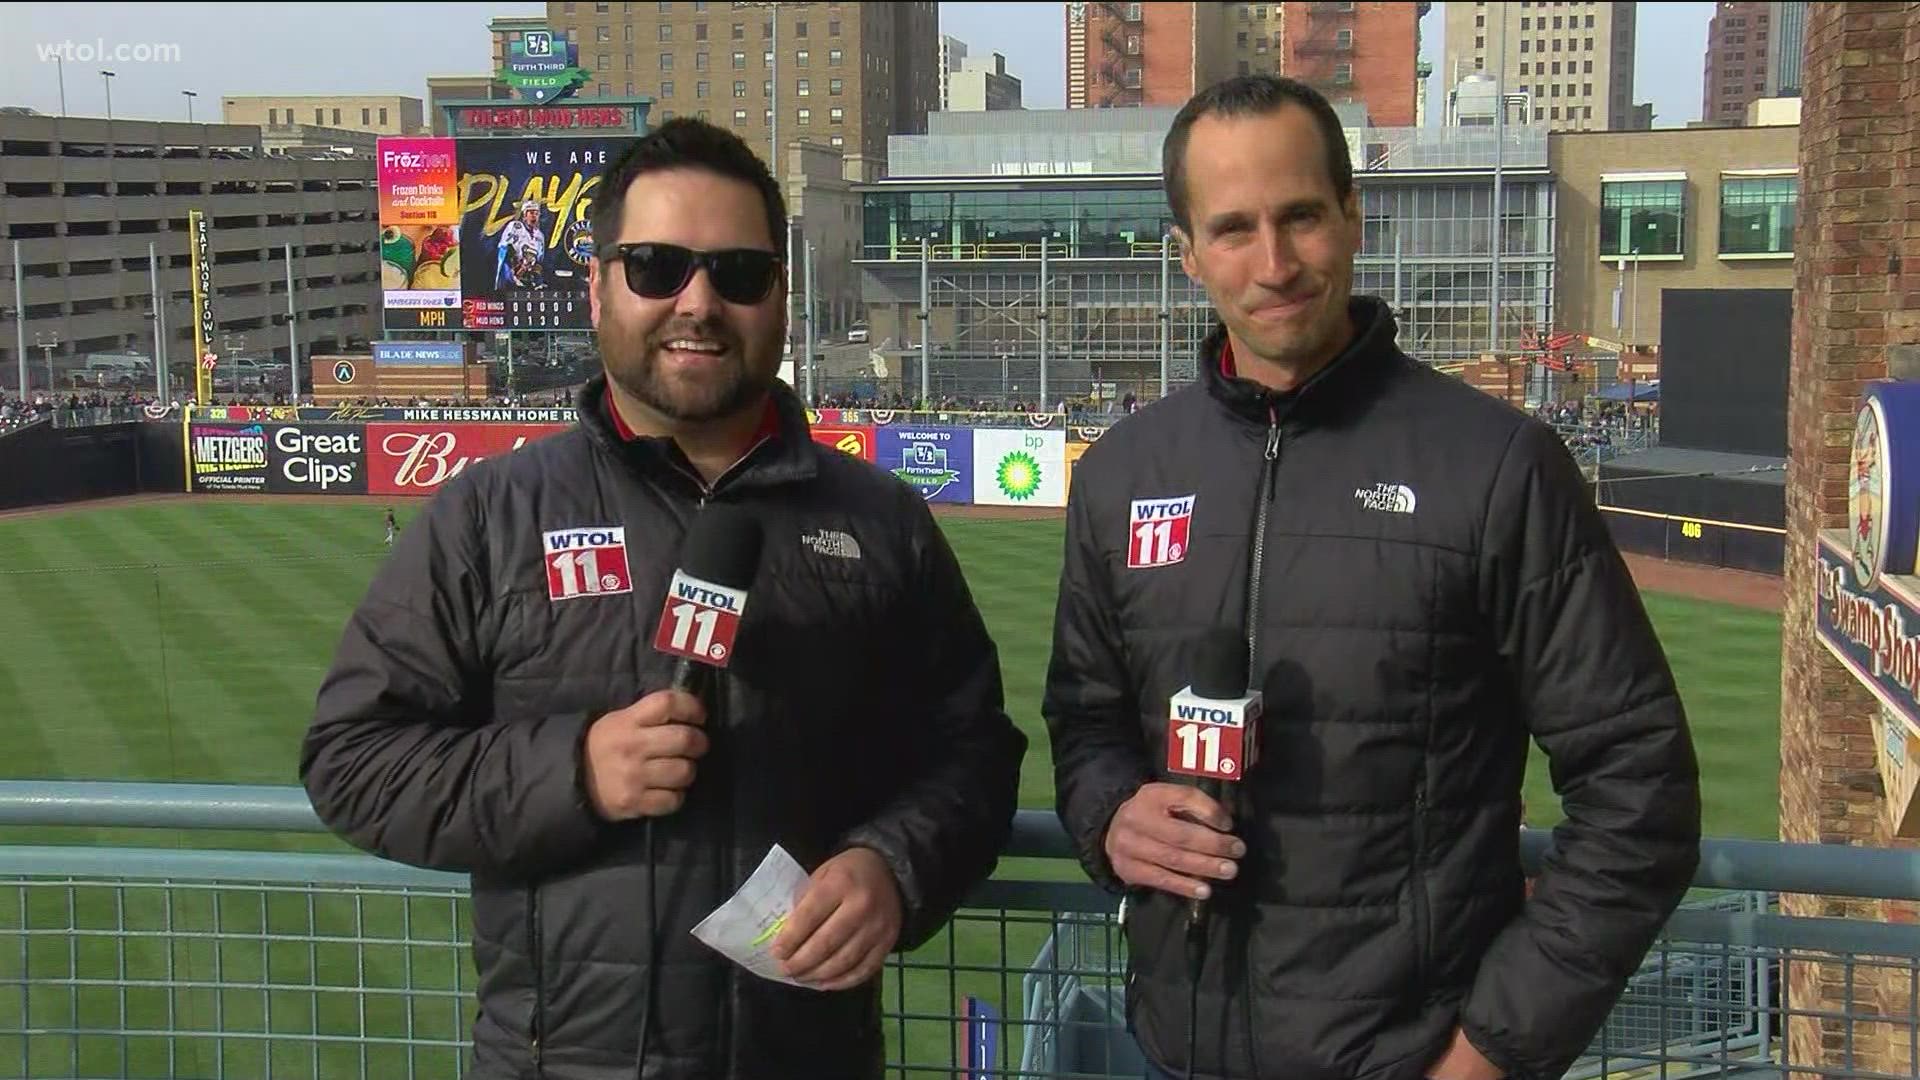 The WTOL 11 News team brings you live coverage of the 20th Opening Day at Fifth Third Field for the Toledo Mud Hens!